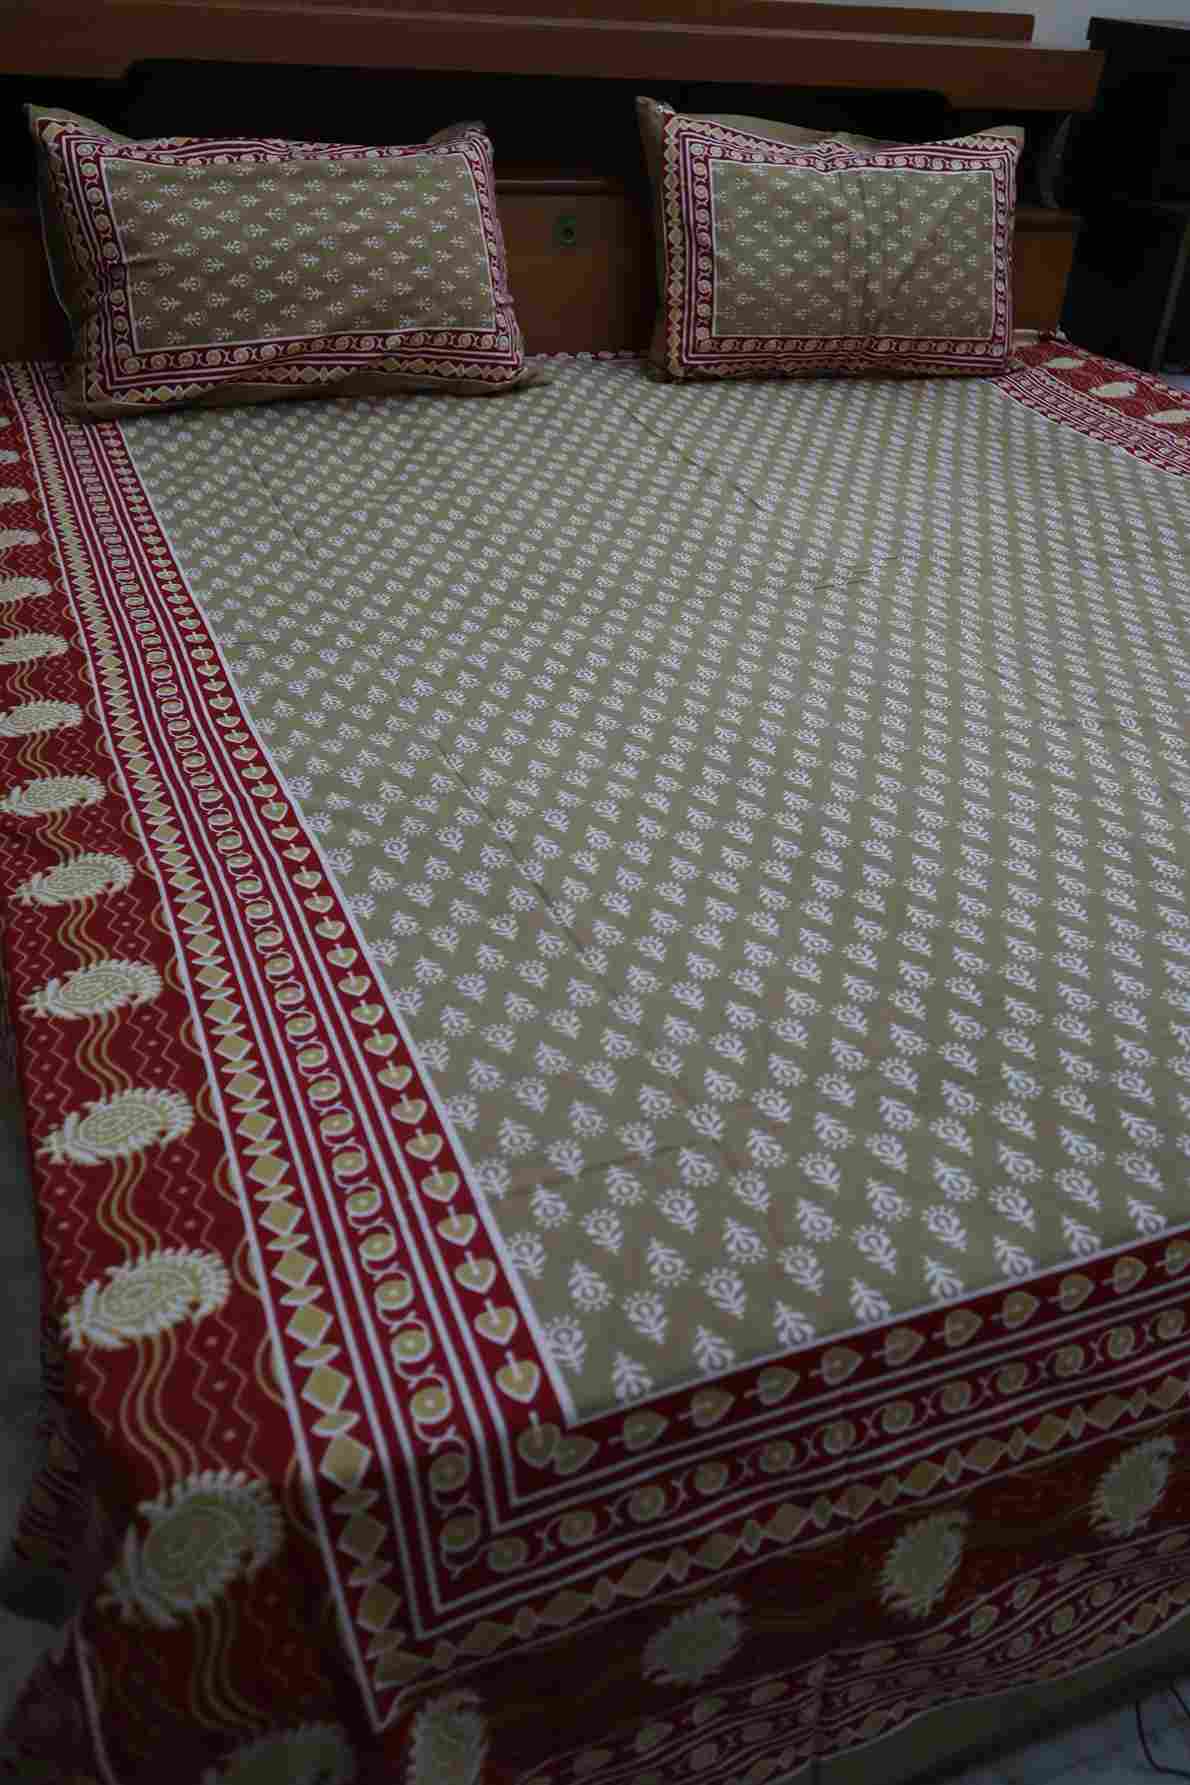 Pure Cotton Printed Butti Jaipuri Bedsheets for Double Bed with Pillow Covers, 90" x 108" King Size, 180 TC, Breathable and Skin Friendly